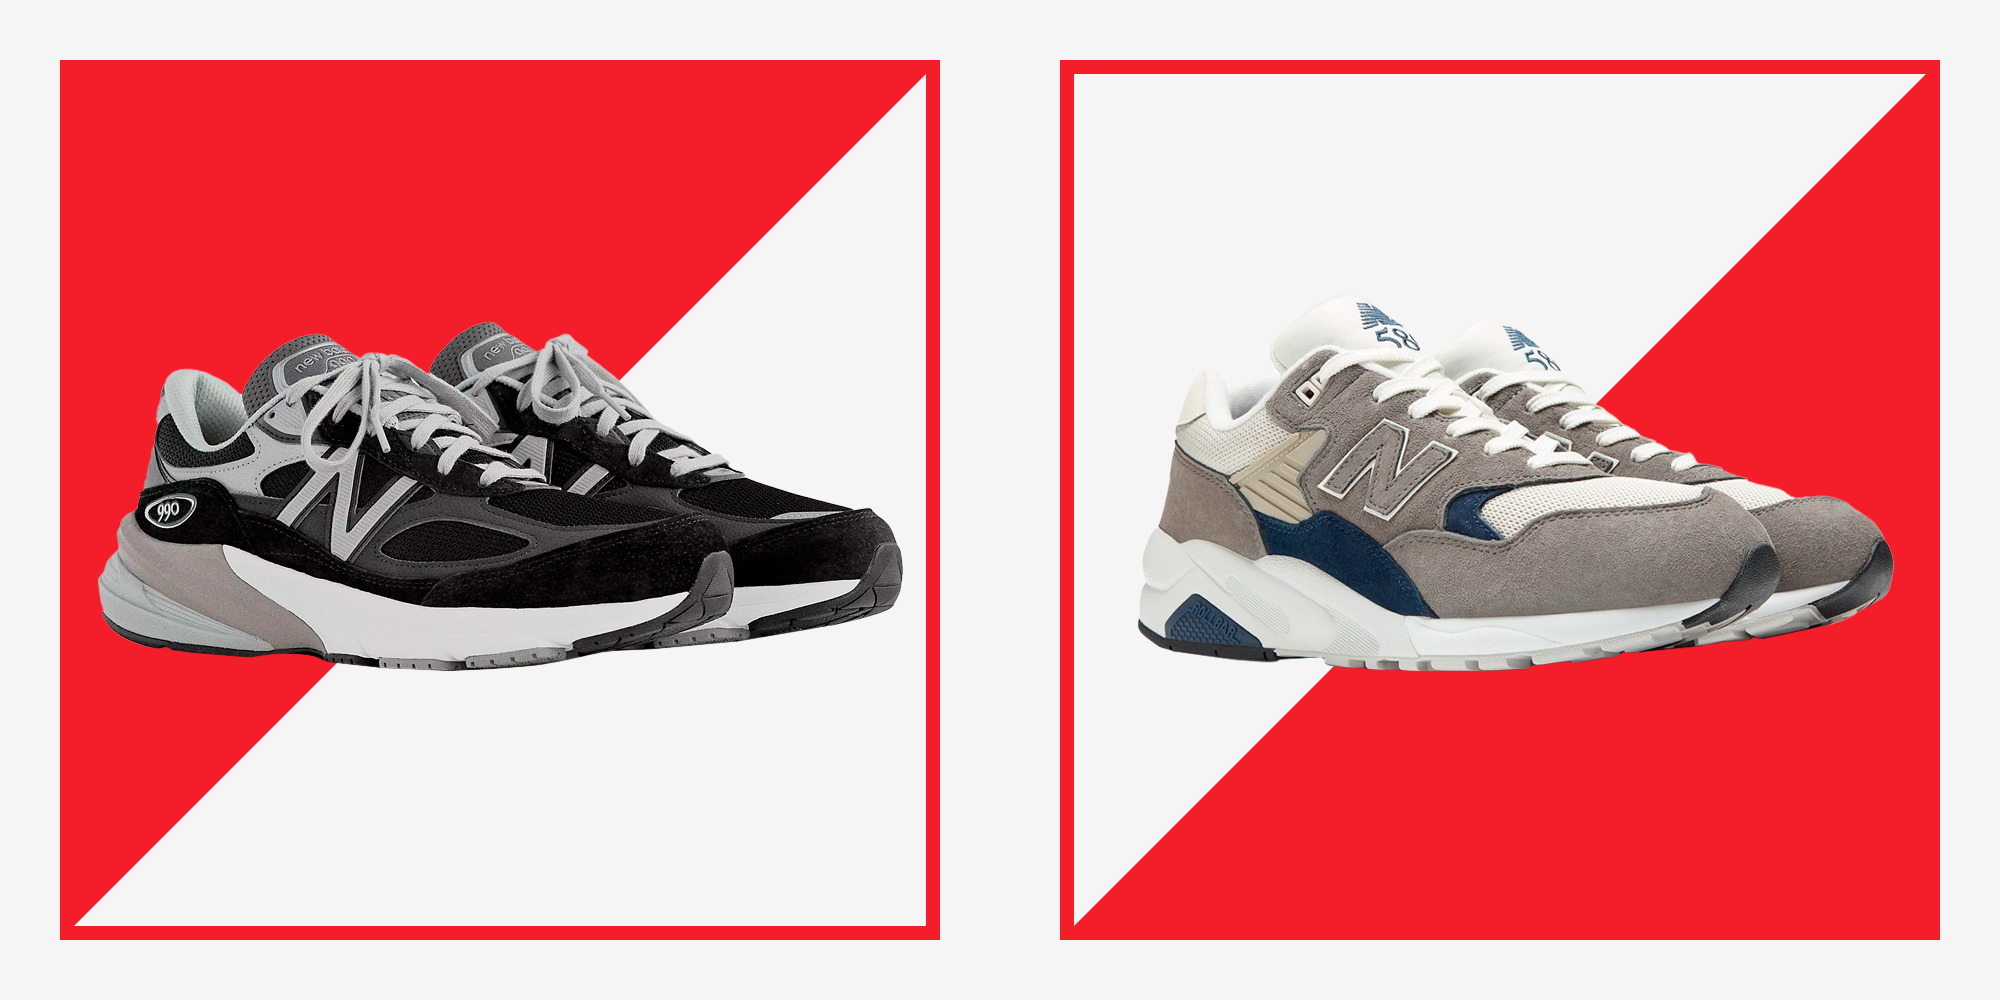 10 New Balance Shoes That Every Man Needs to Try